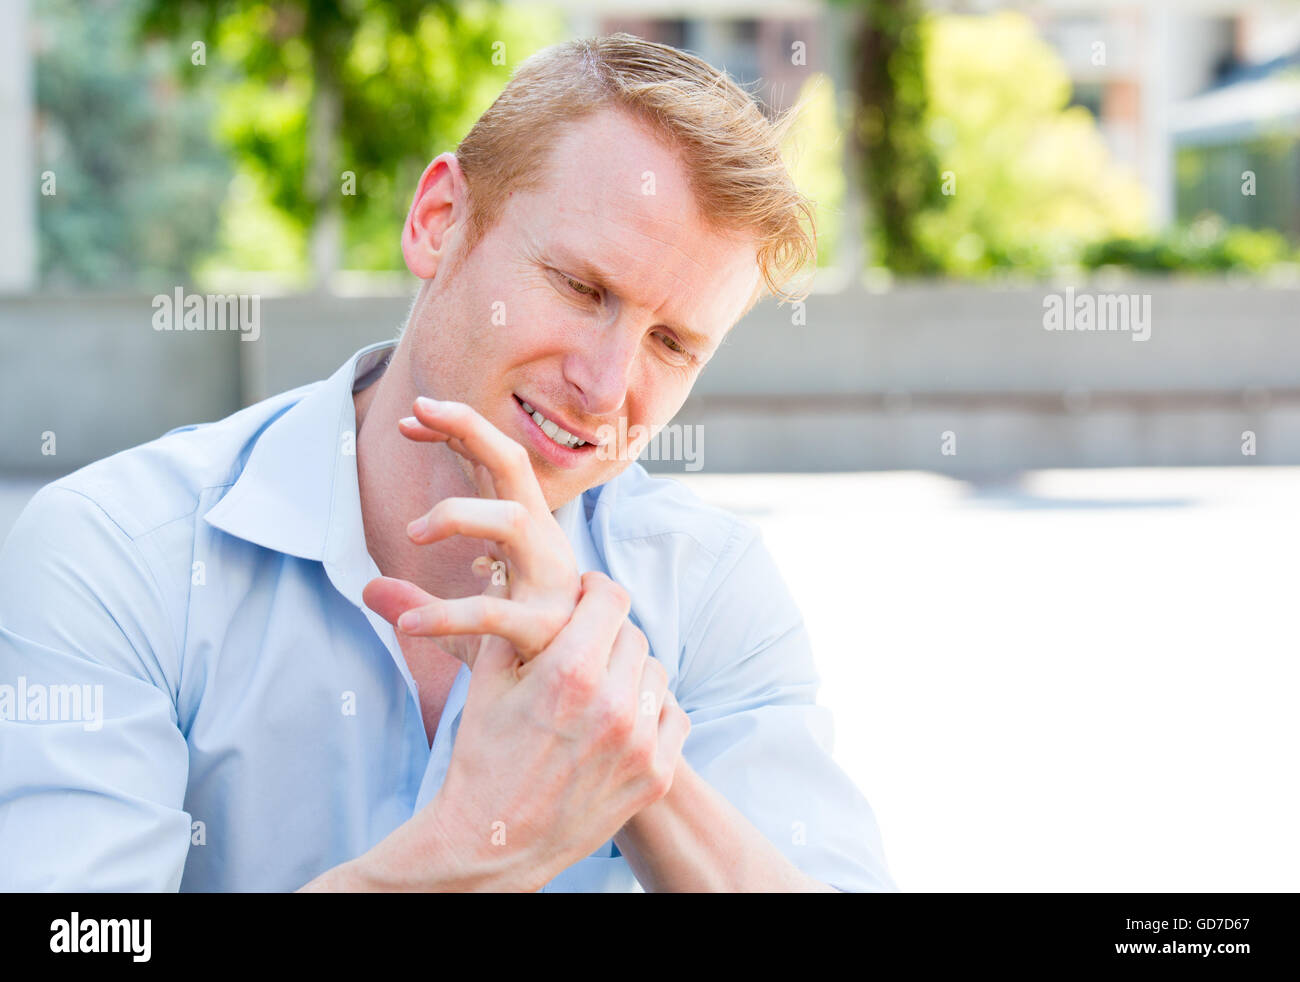 Closeup portrait, young man having acute bad joint pain in his hands, writer's cramp, massaging them, sitting in chair, isolated Stock Photo